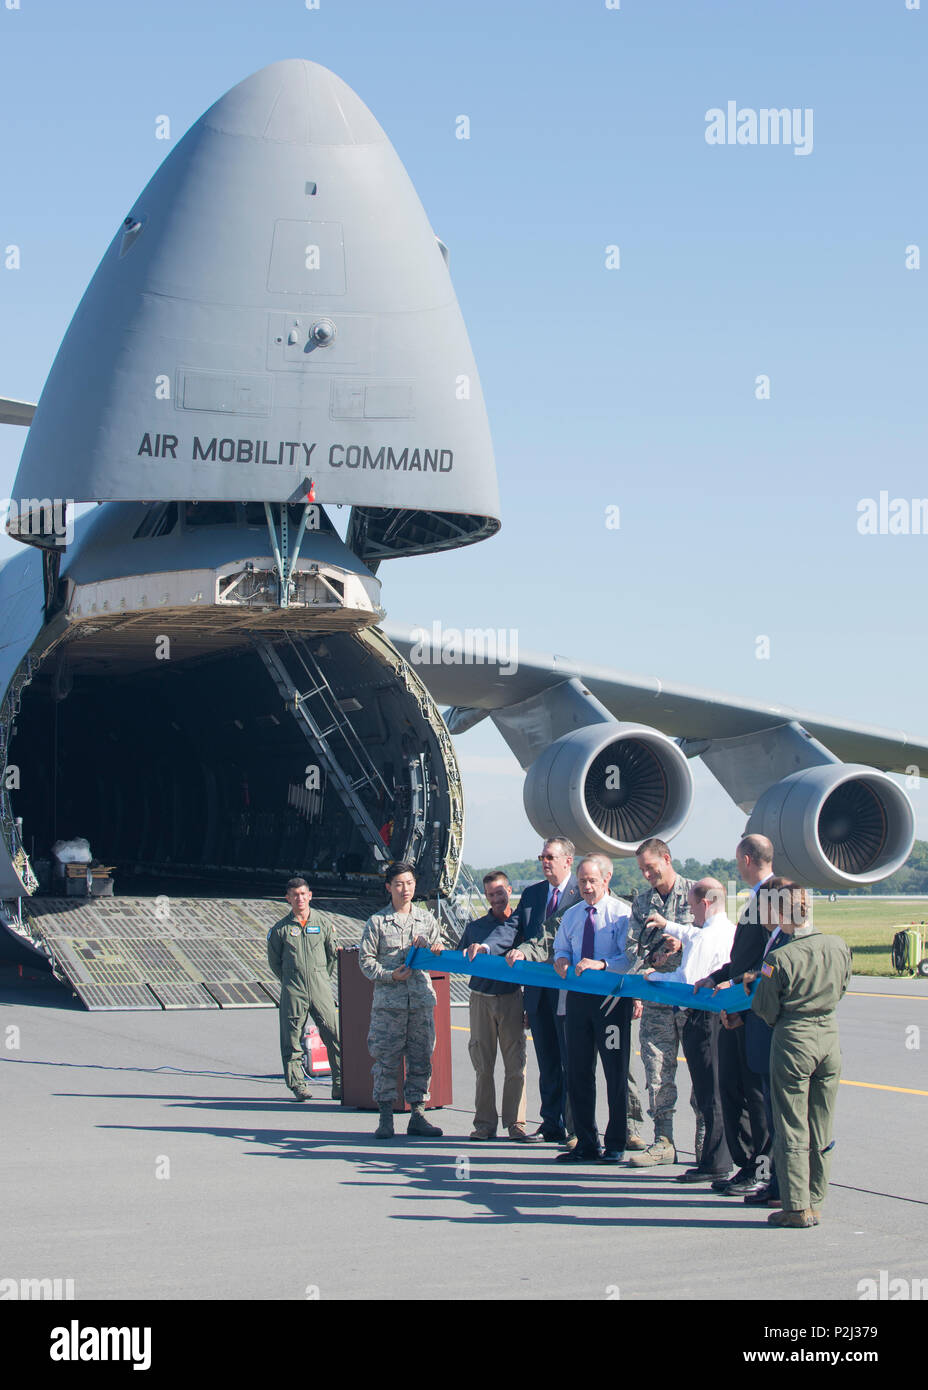 Col. Ethan Griffin, 436th Airlift Wing commander, and Sen. Chris Coons, D-Del.,; cut a ribbon marking the reopening of Runway 01-19 during anafter completion of Phase II of an extensive reconstruction project Sept. 23, 2016, at Dover Air Force Base, Del. Shown from left, Airman 1st Class Joseph Cho, 436th Aircraft Maintenance Squadron; Tony Price, sub-contractor representative; Jeff Wagonhurst, Versar Inc. president and CEO; Col. Scott Durham, 512th AW commander; Sen. Tom Carper, D-Del.; Col. Ethan Griffin, 436th AW commander; Sen. Chris Coons, D-Del.; Drew Slater, Rep. John Carney D-Del. repr Stock Photo